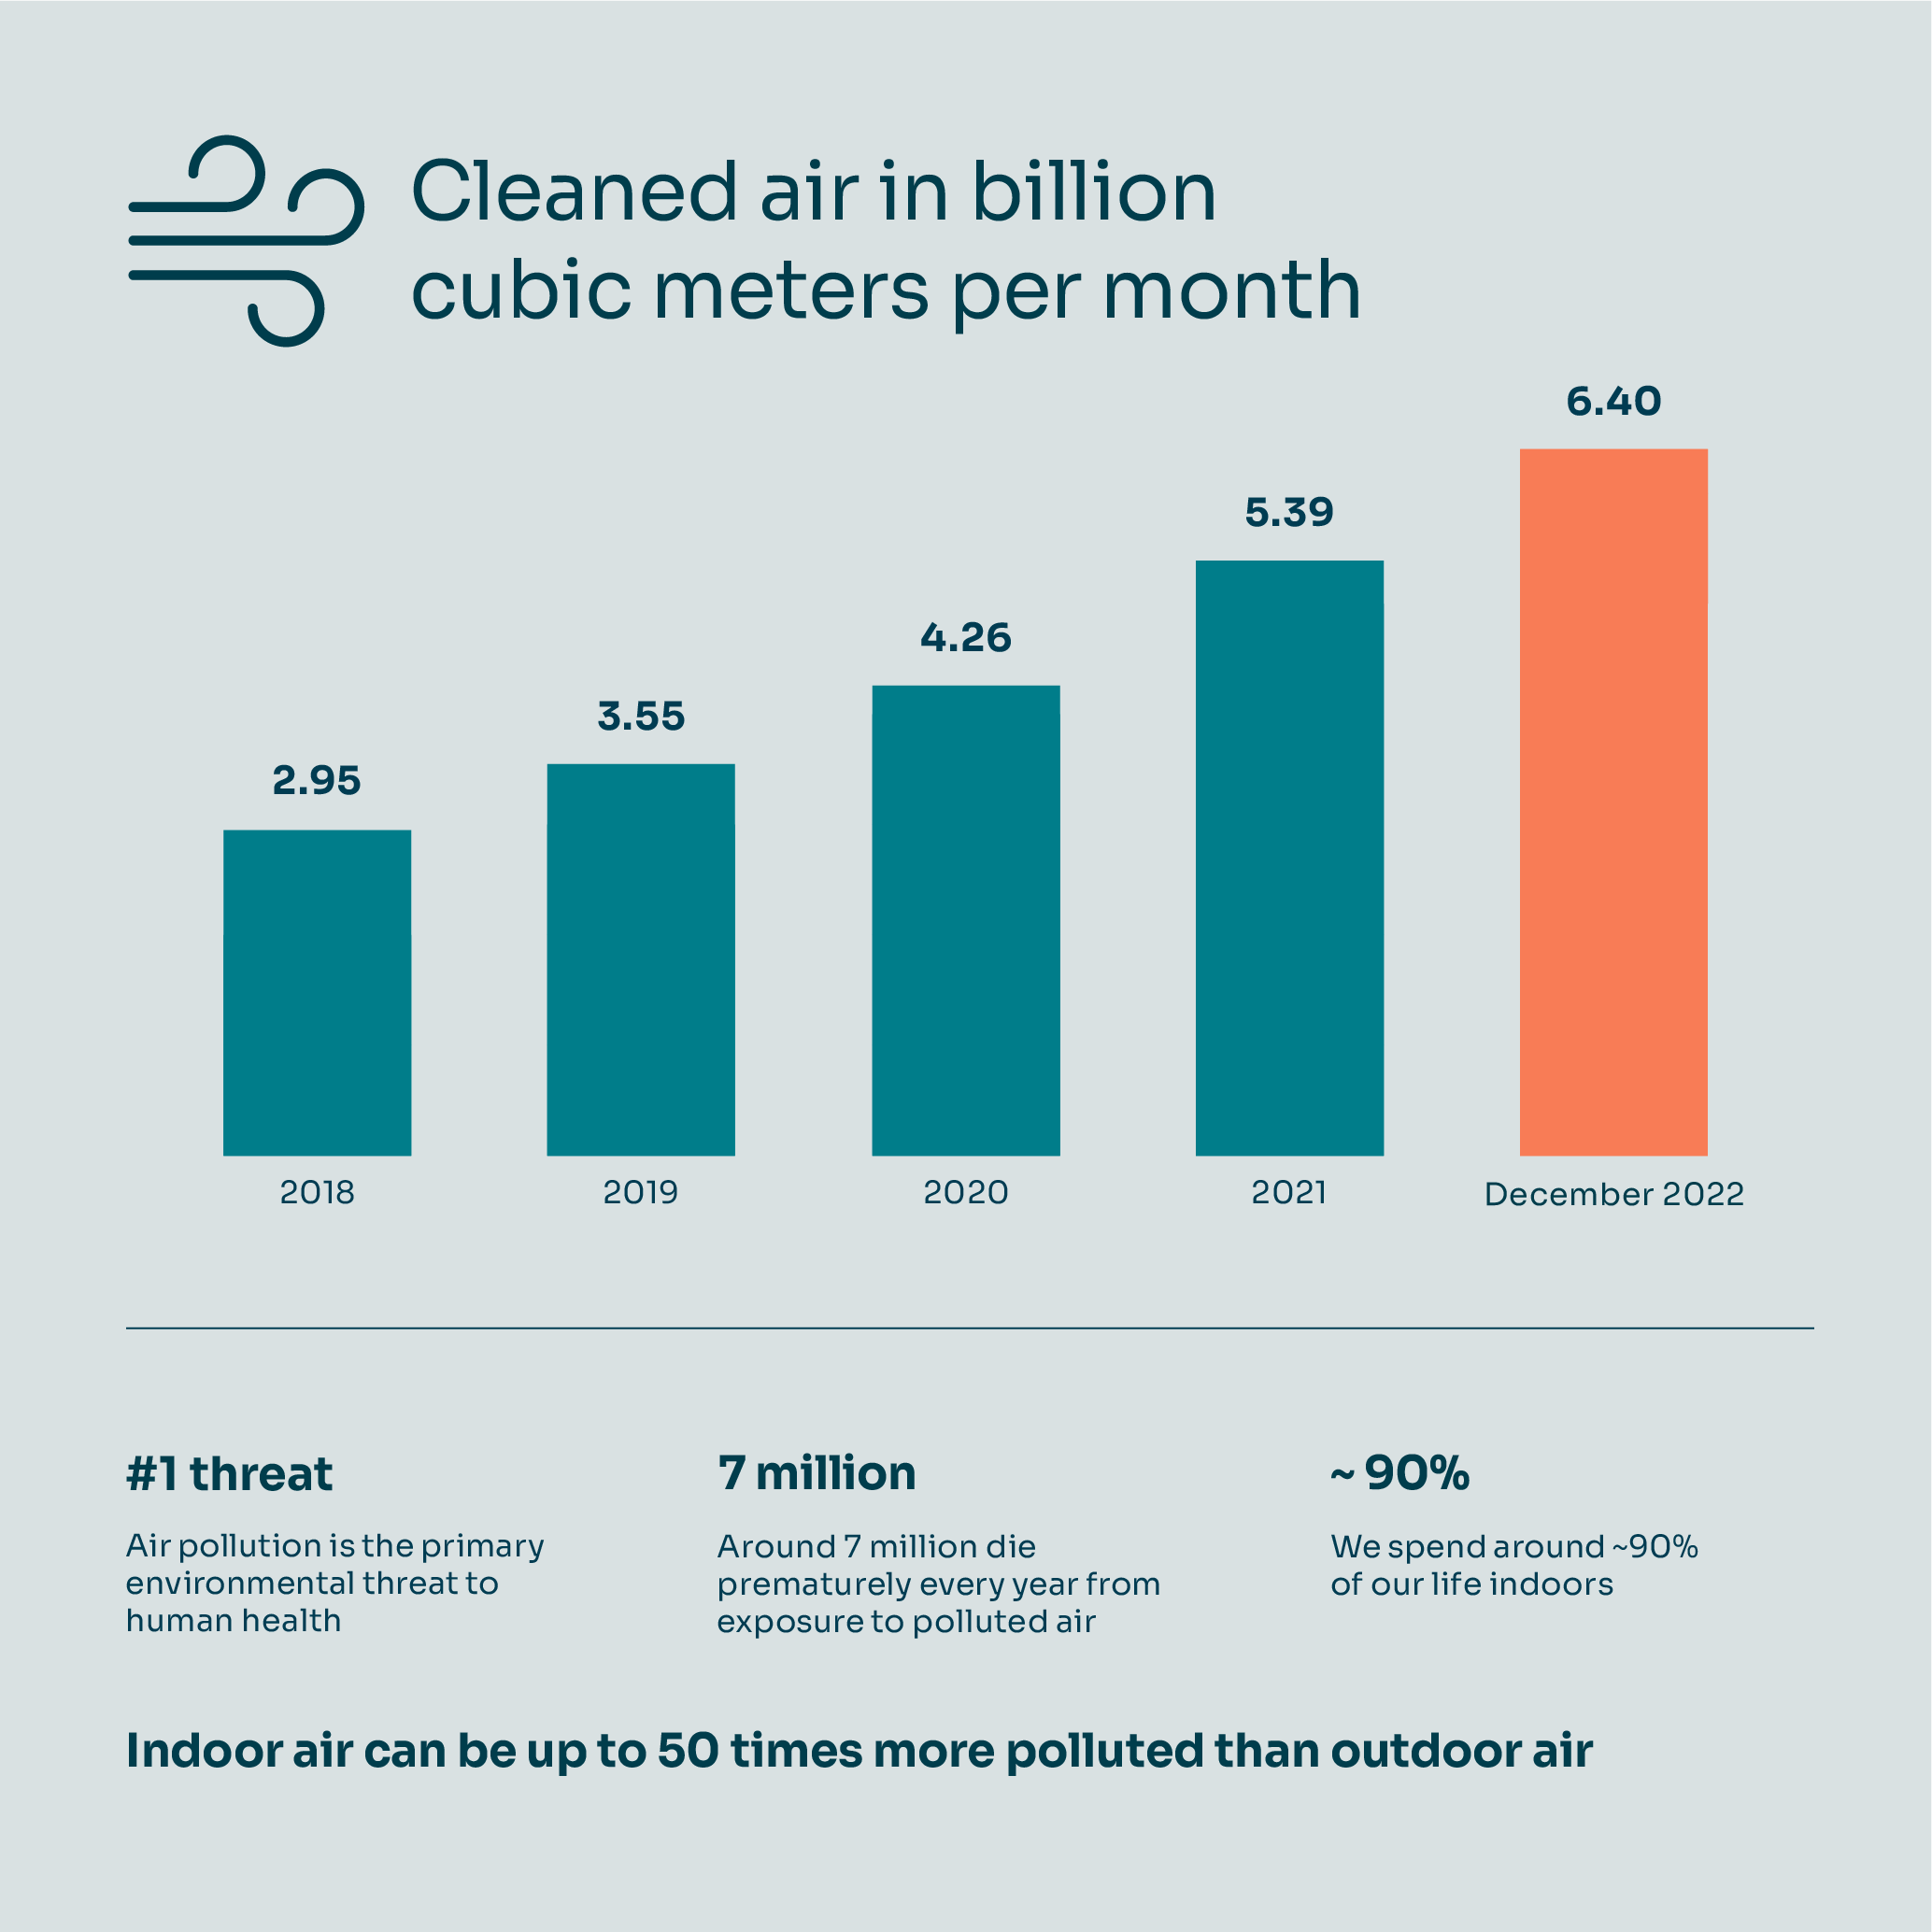 Clean air delivered in Q2